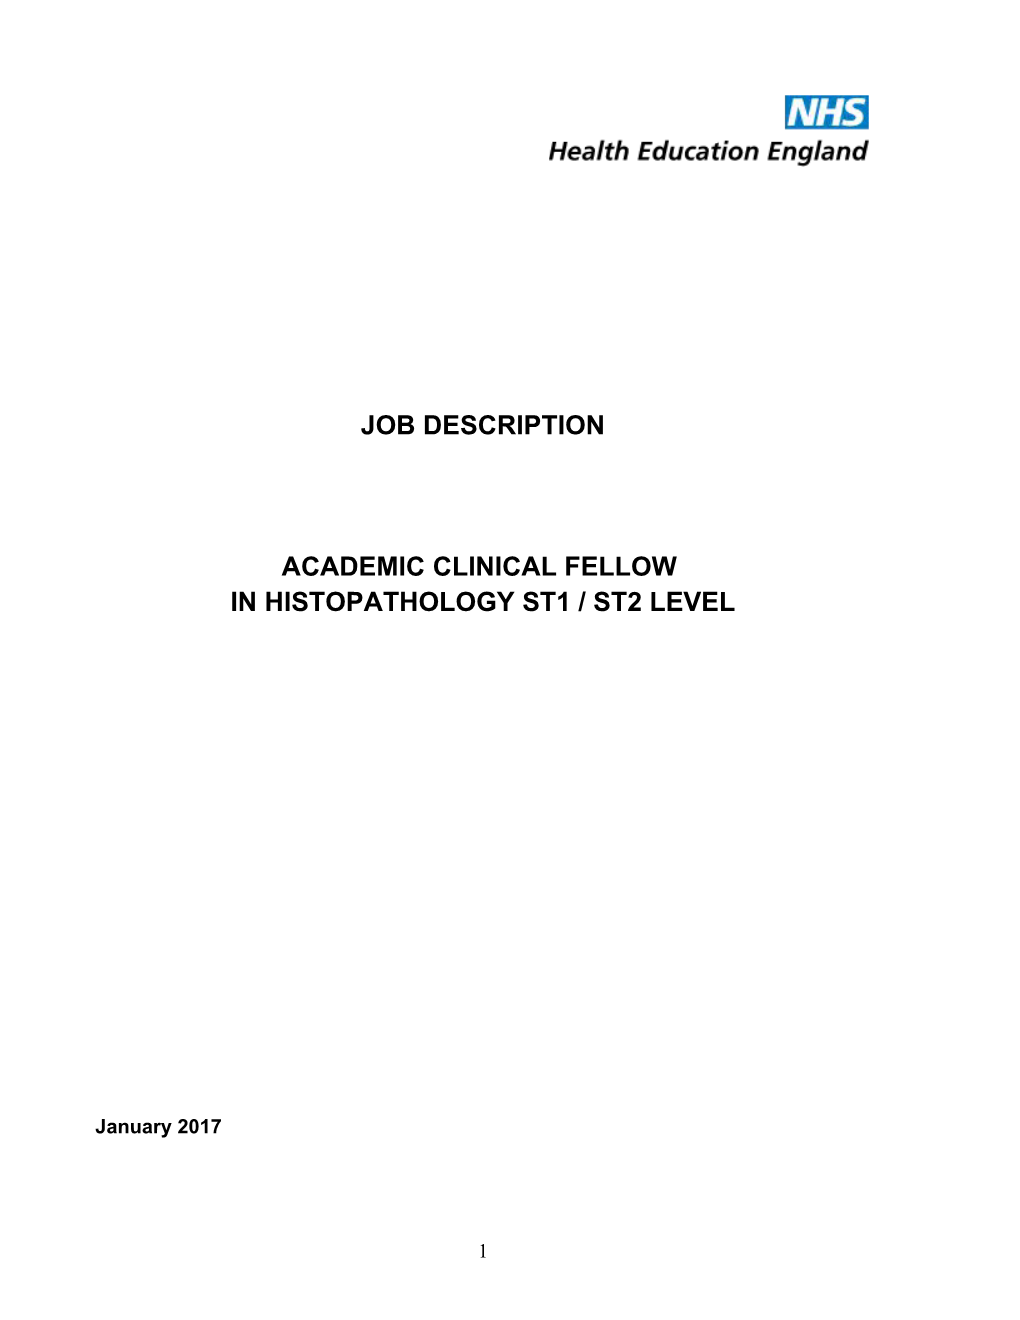 Academic Clinical Fellow in Transplantation (General Surgery)